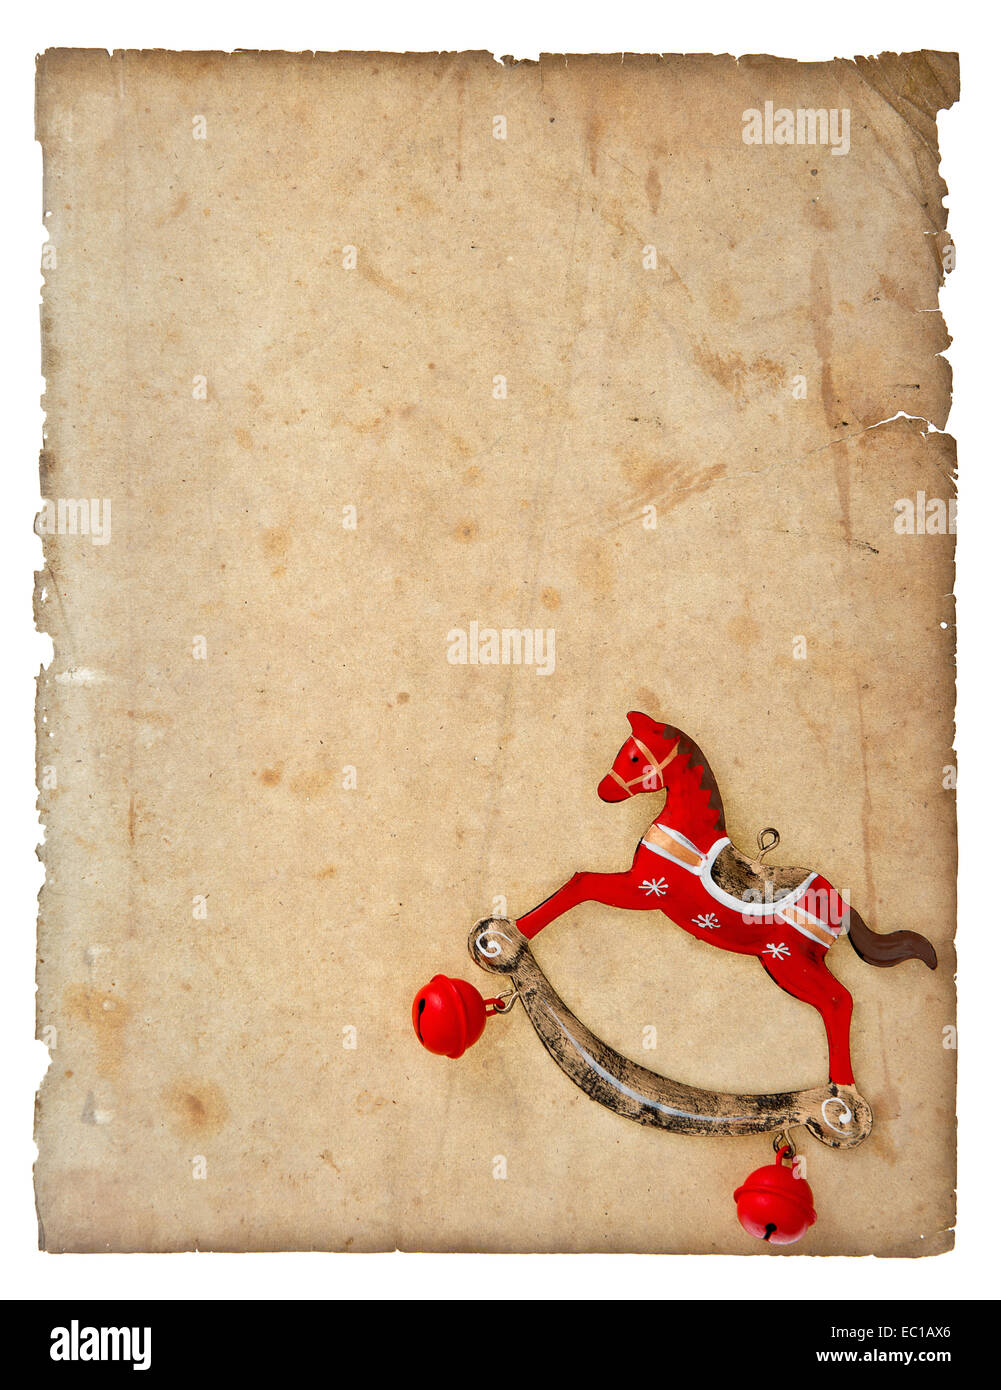 vintage christmas decoration rocking horse toy with aged paper page isolated on white background Stock Photo